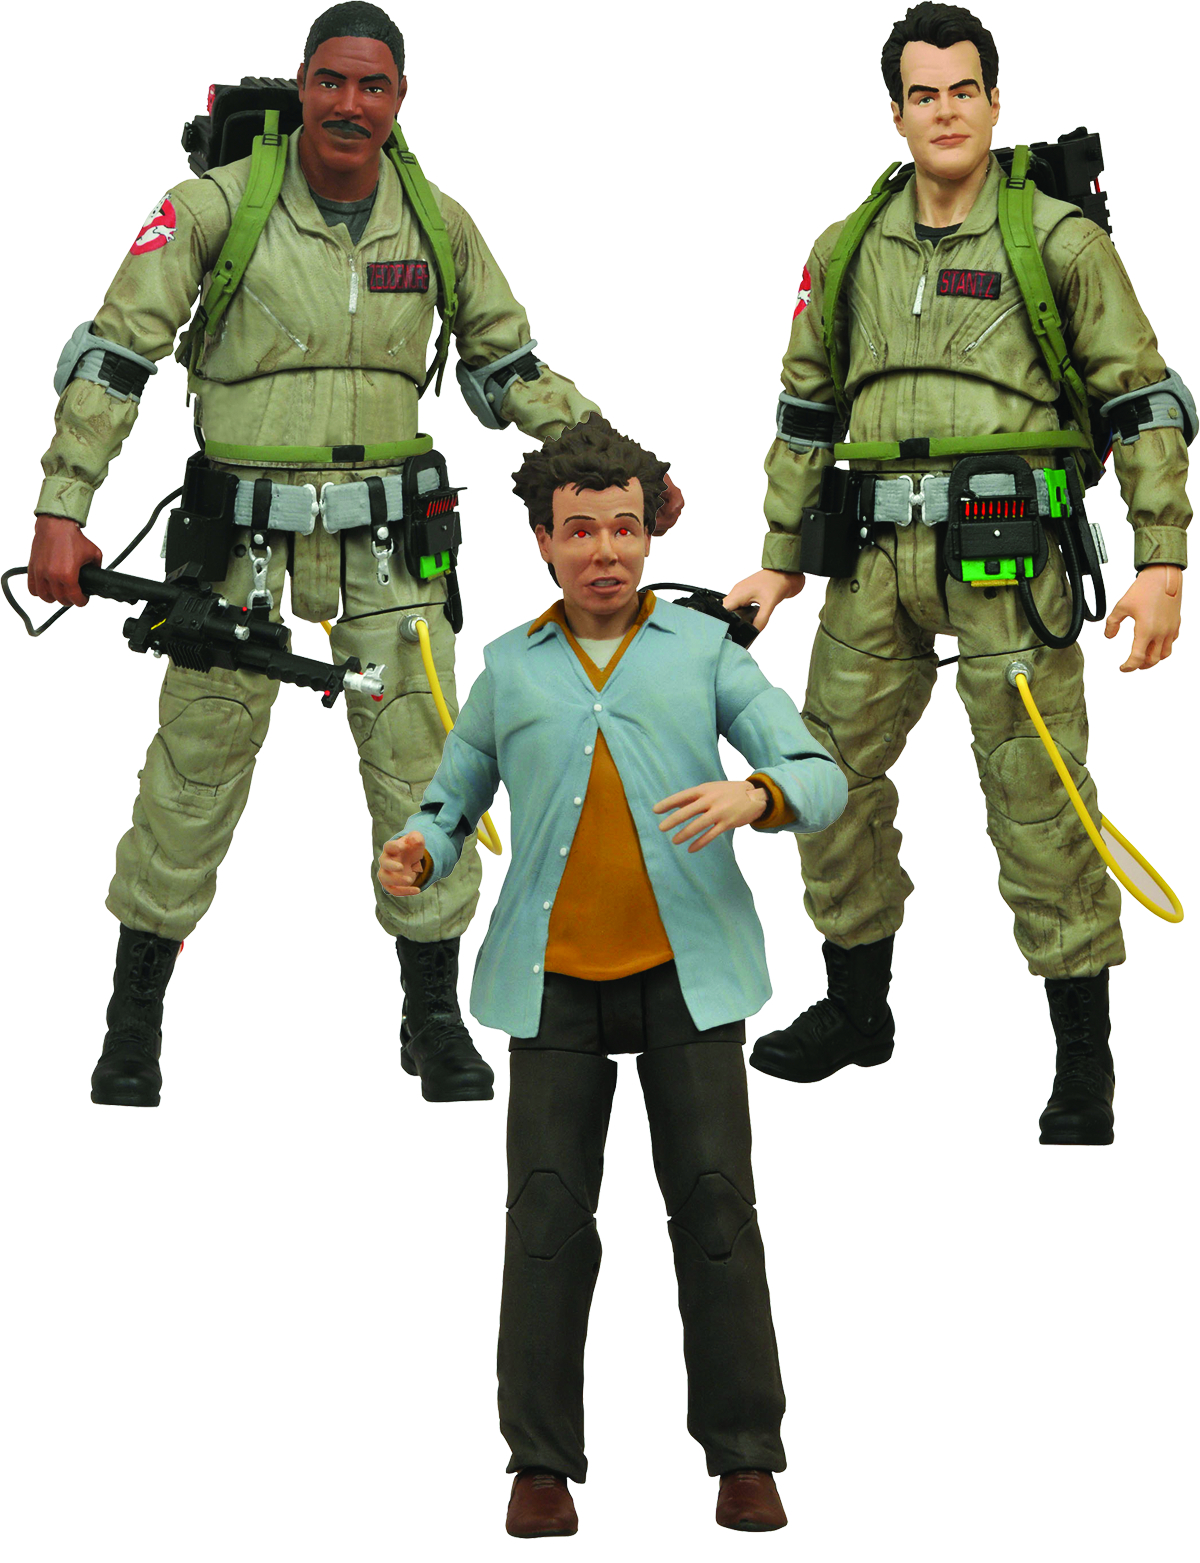 GHOSTBUSTERS SELECT AF SERIES 1 ASST